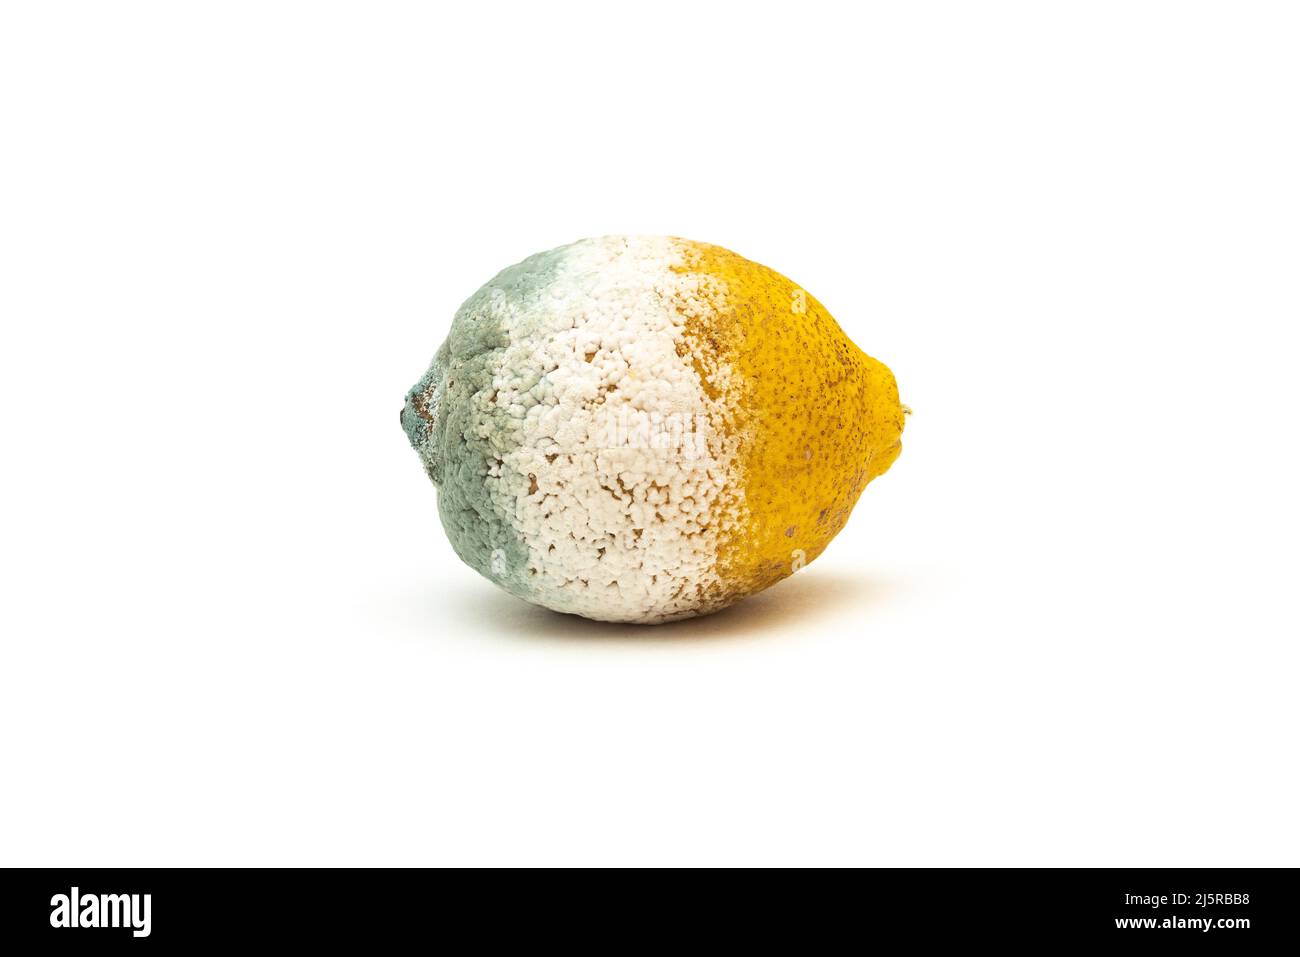 Lemon covered with mold on a white background Stock Photo